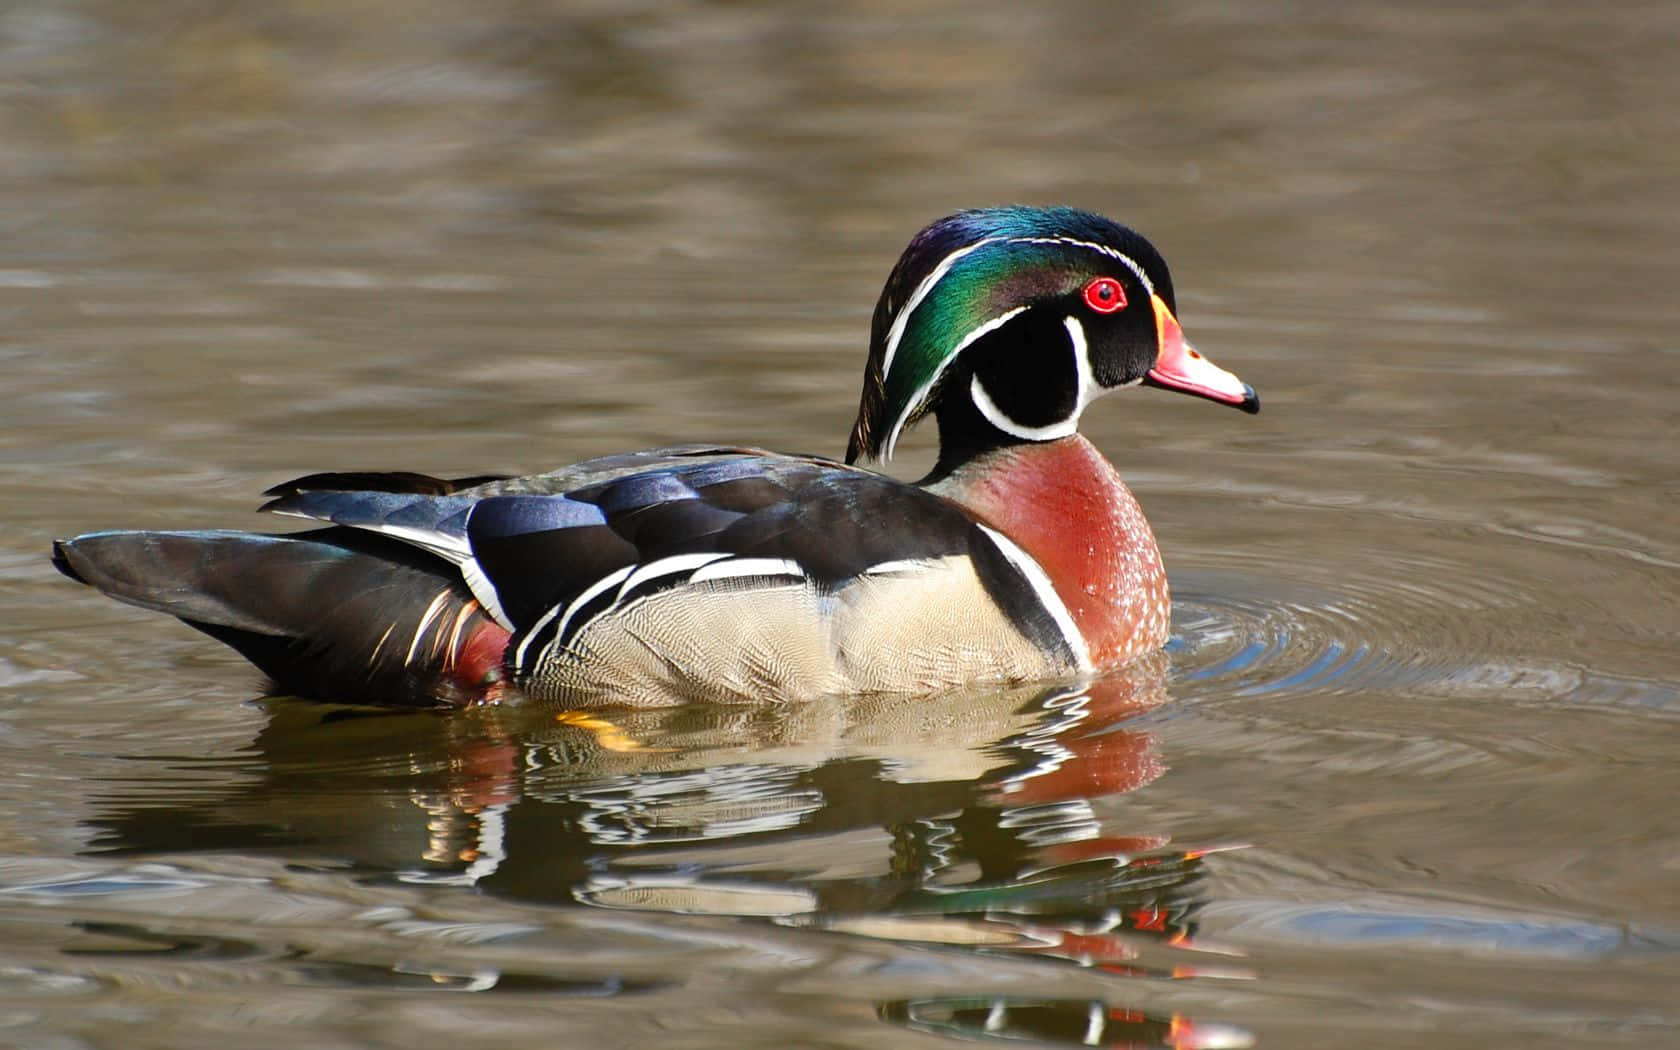 A wood duck basking in the spring sunshine